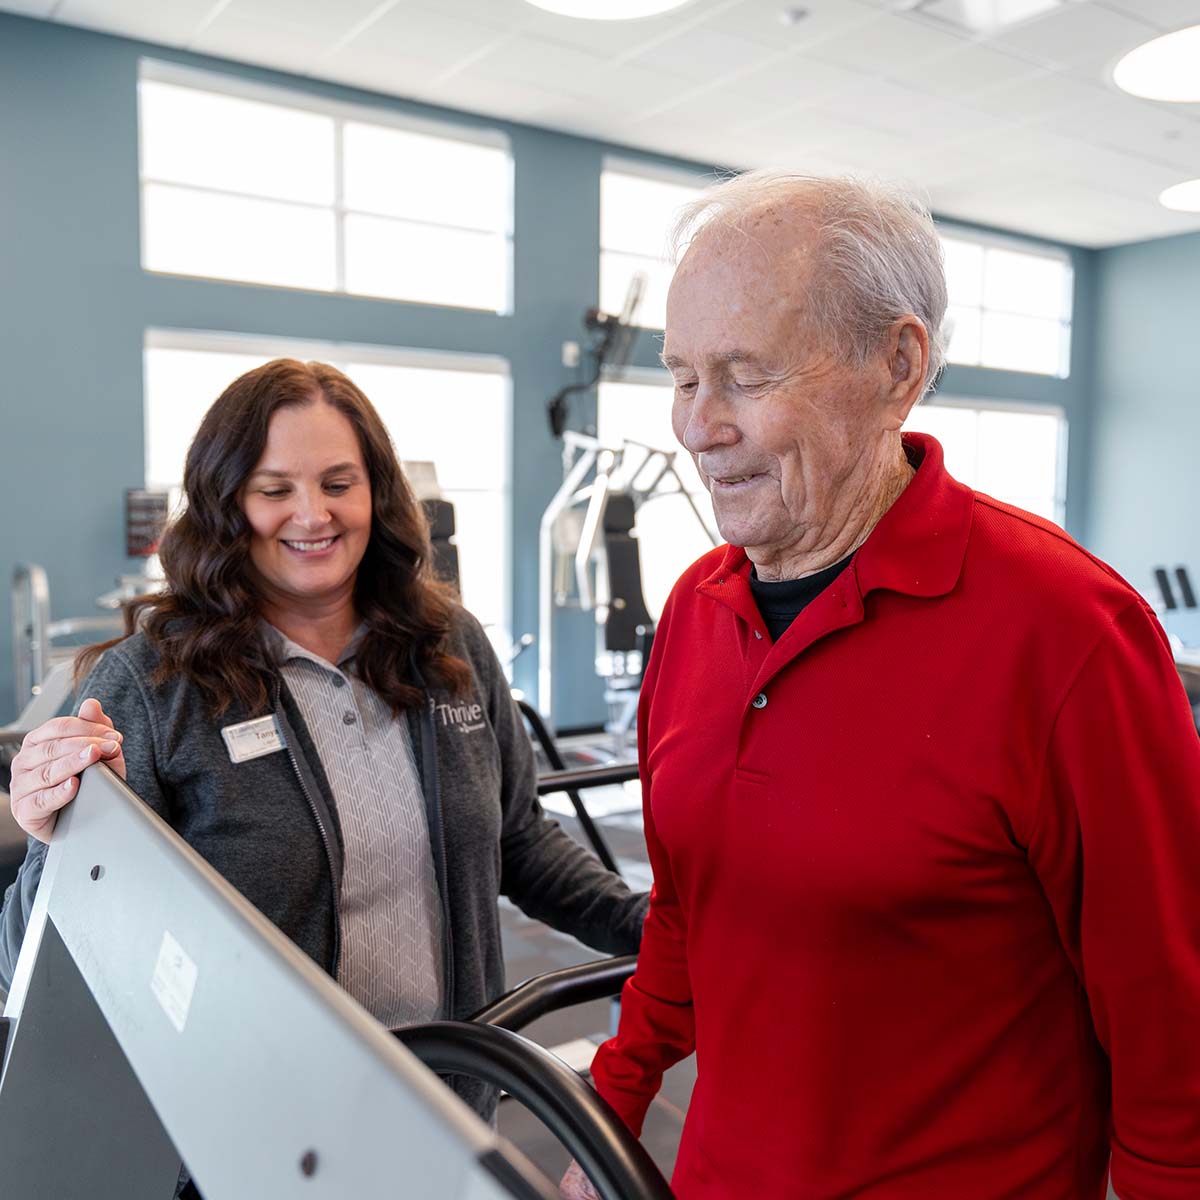 An Immanuel Thrive instructor talks with a resident as they are walking on a treadmill.